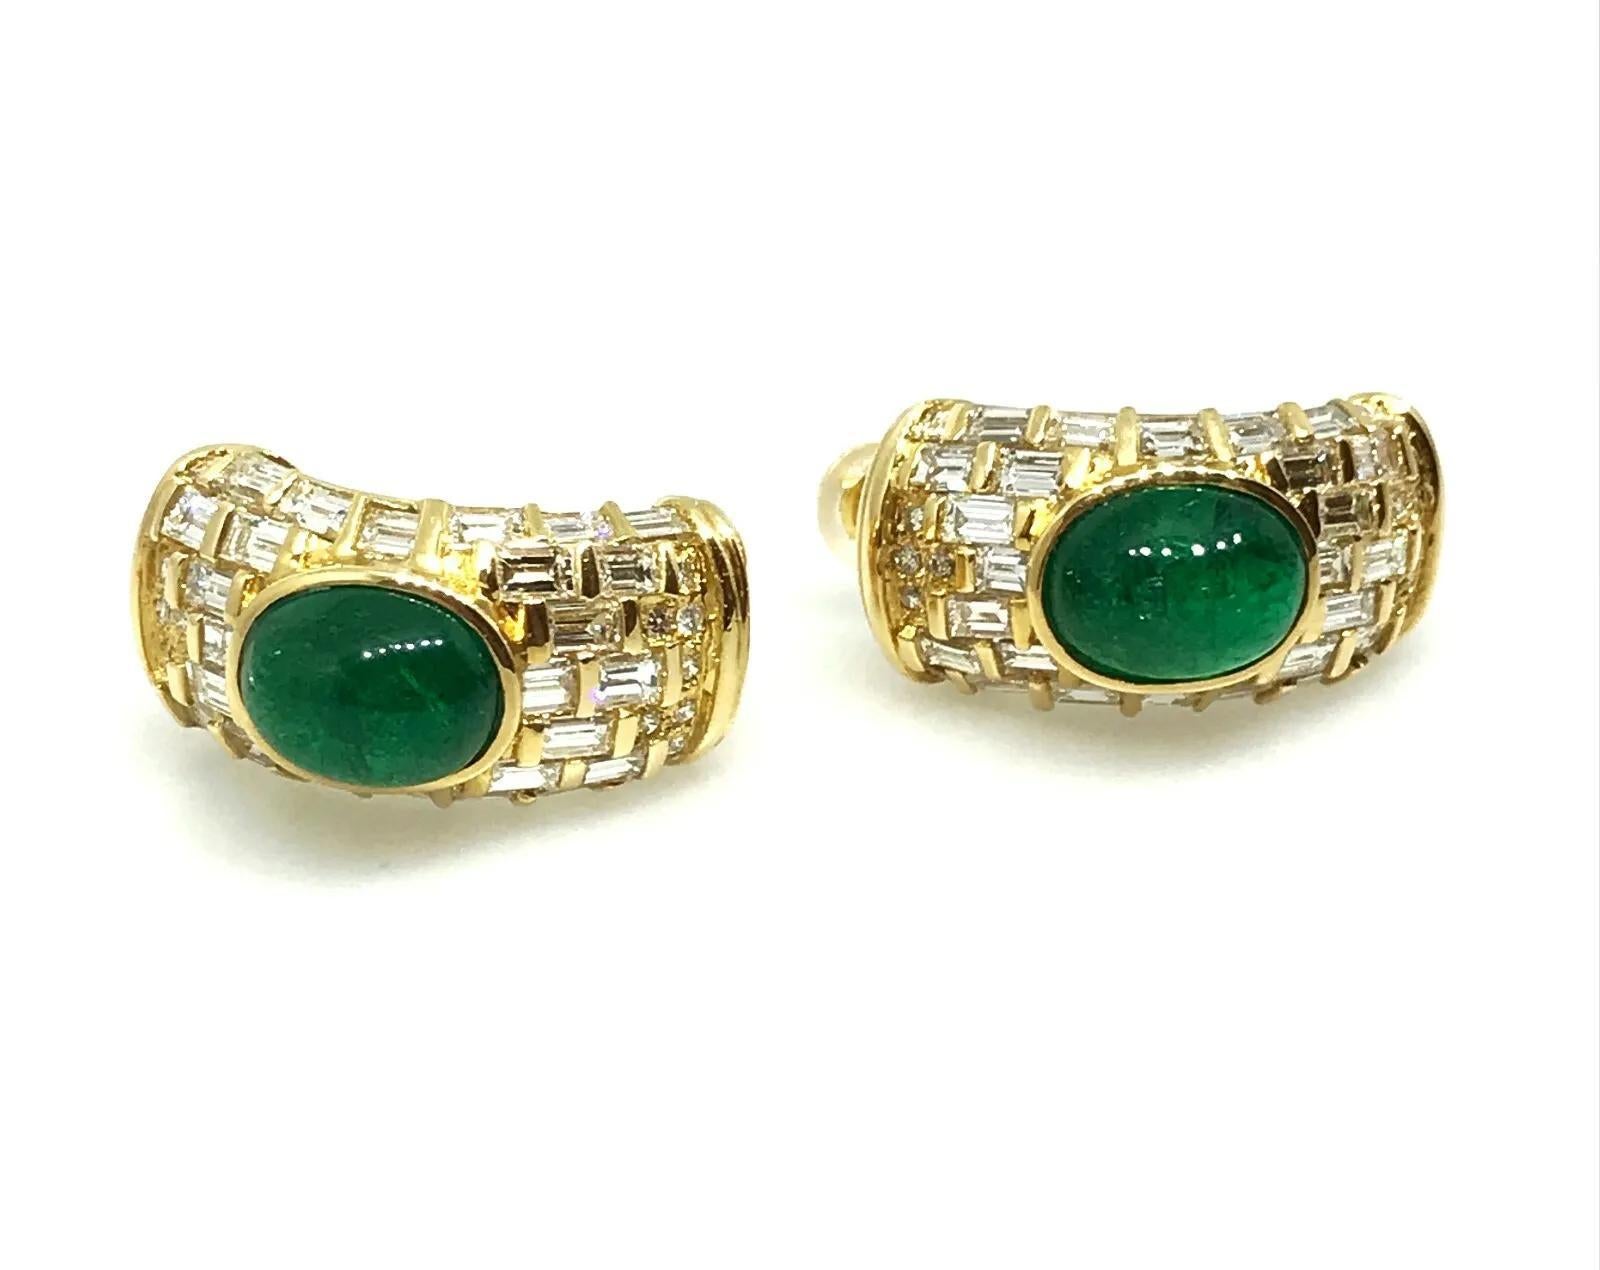 Emerald Cabochons and Diamond Earrings features 2 Oval shaped Emerald cabochons in the center accented by 60 Baguettes and 22 round brilliant diamonds set in 18k Yellow Gold. Earrings have post backs for pierced ears.

Total emerald weight is 4